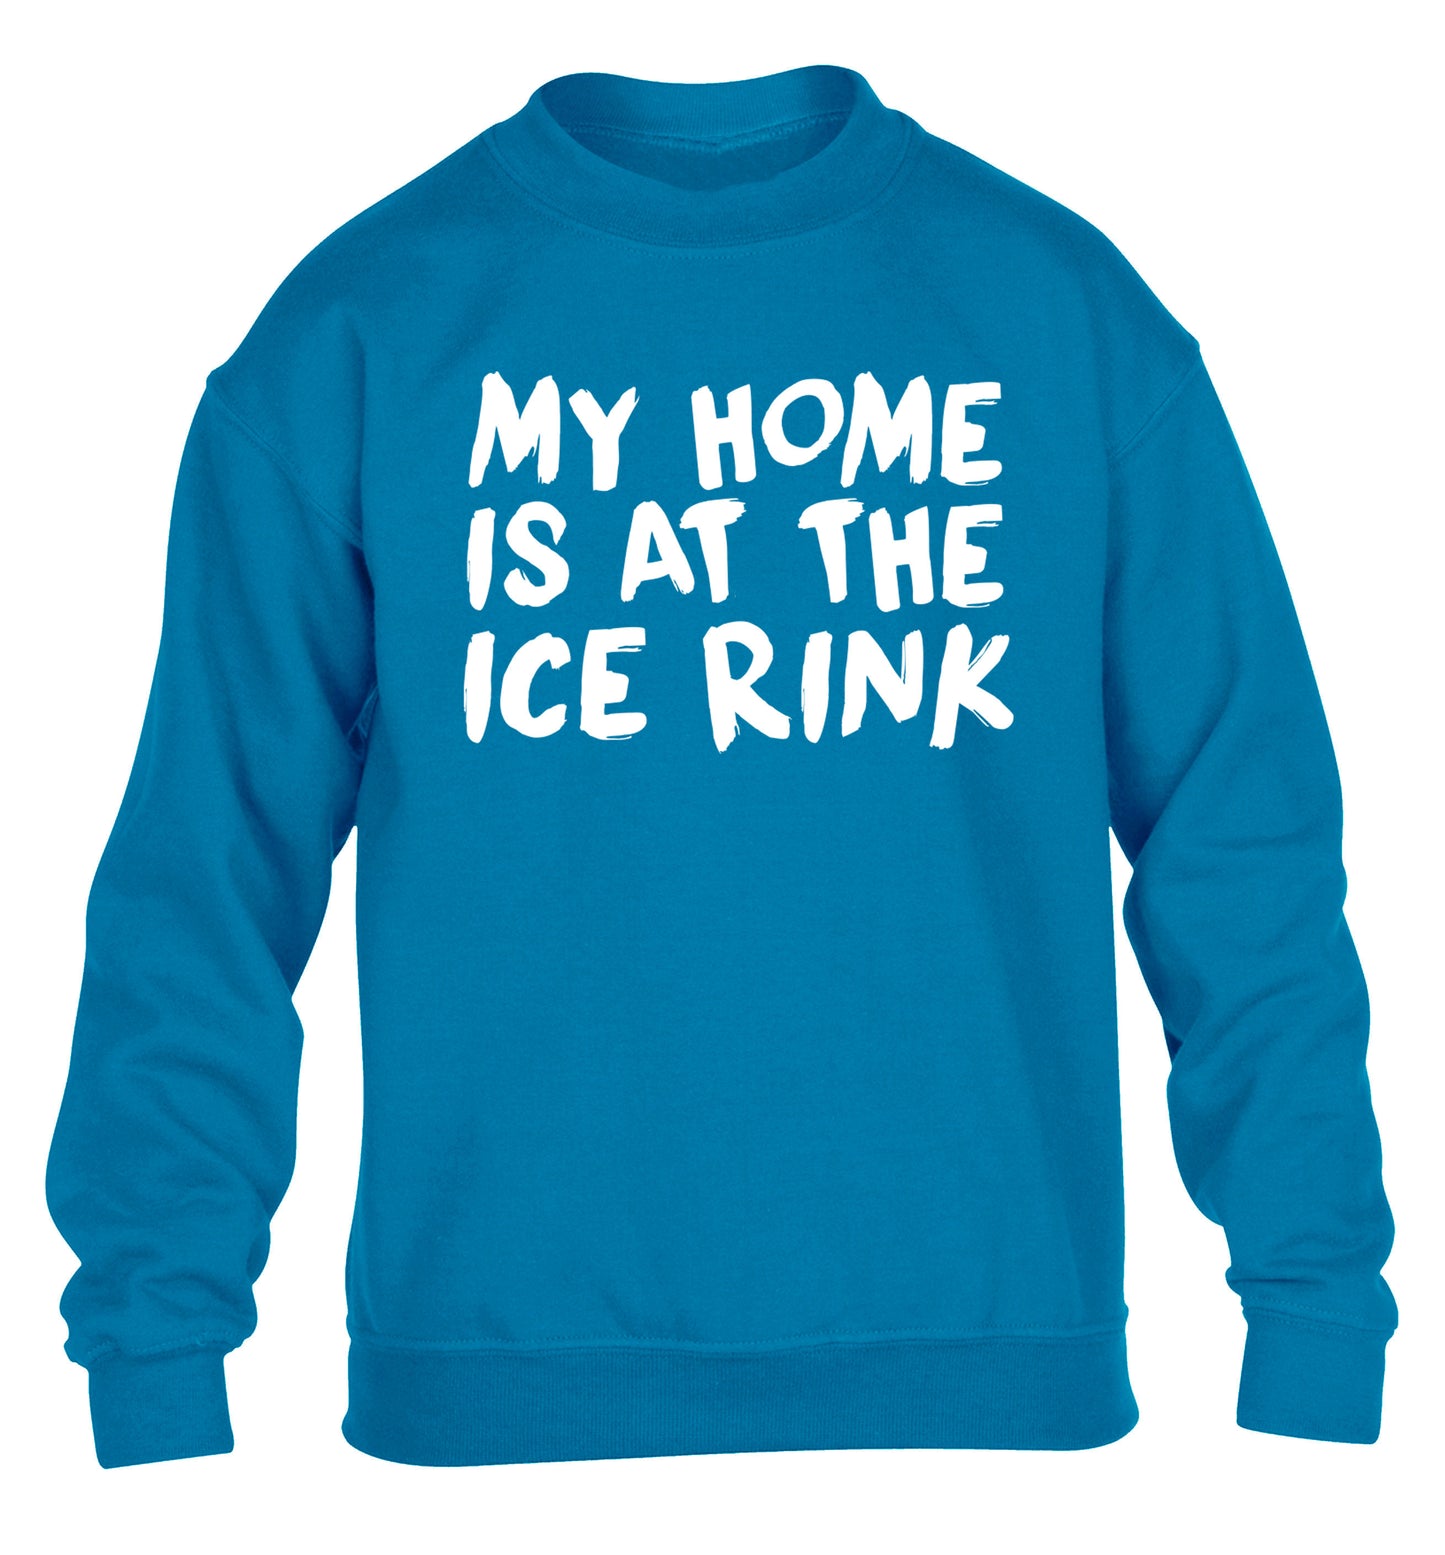 My home is at the ice rink children's blue sweater 12-14 Years